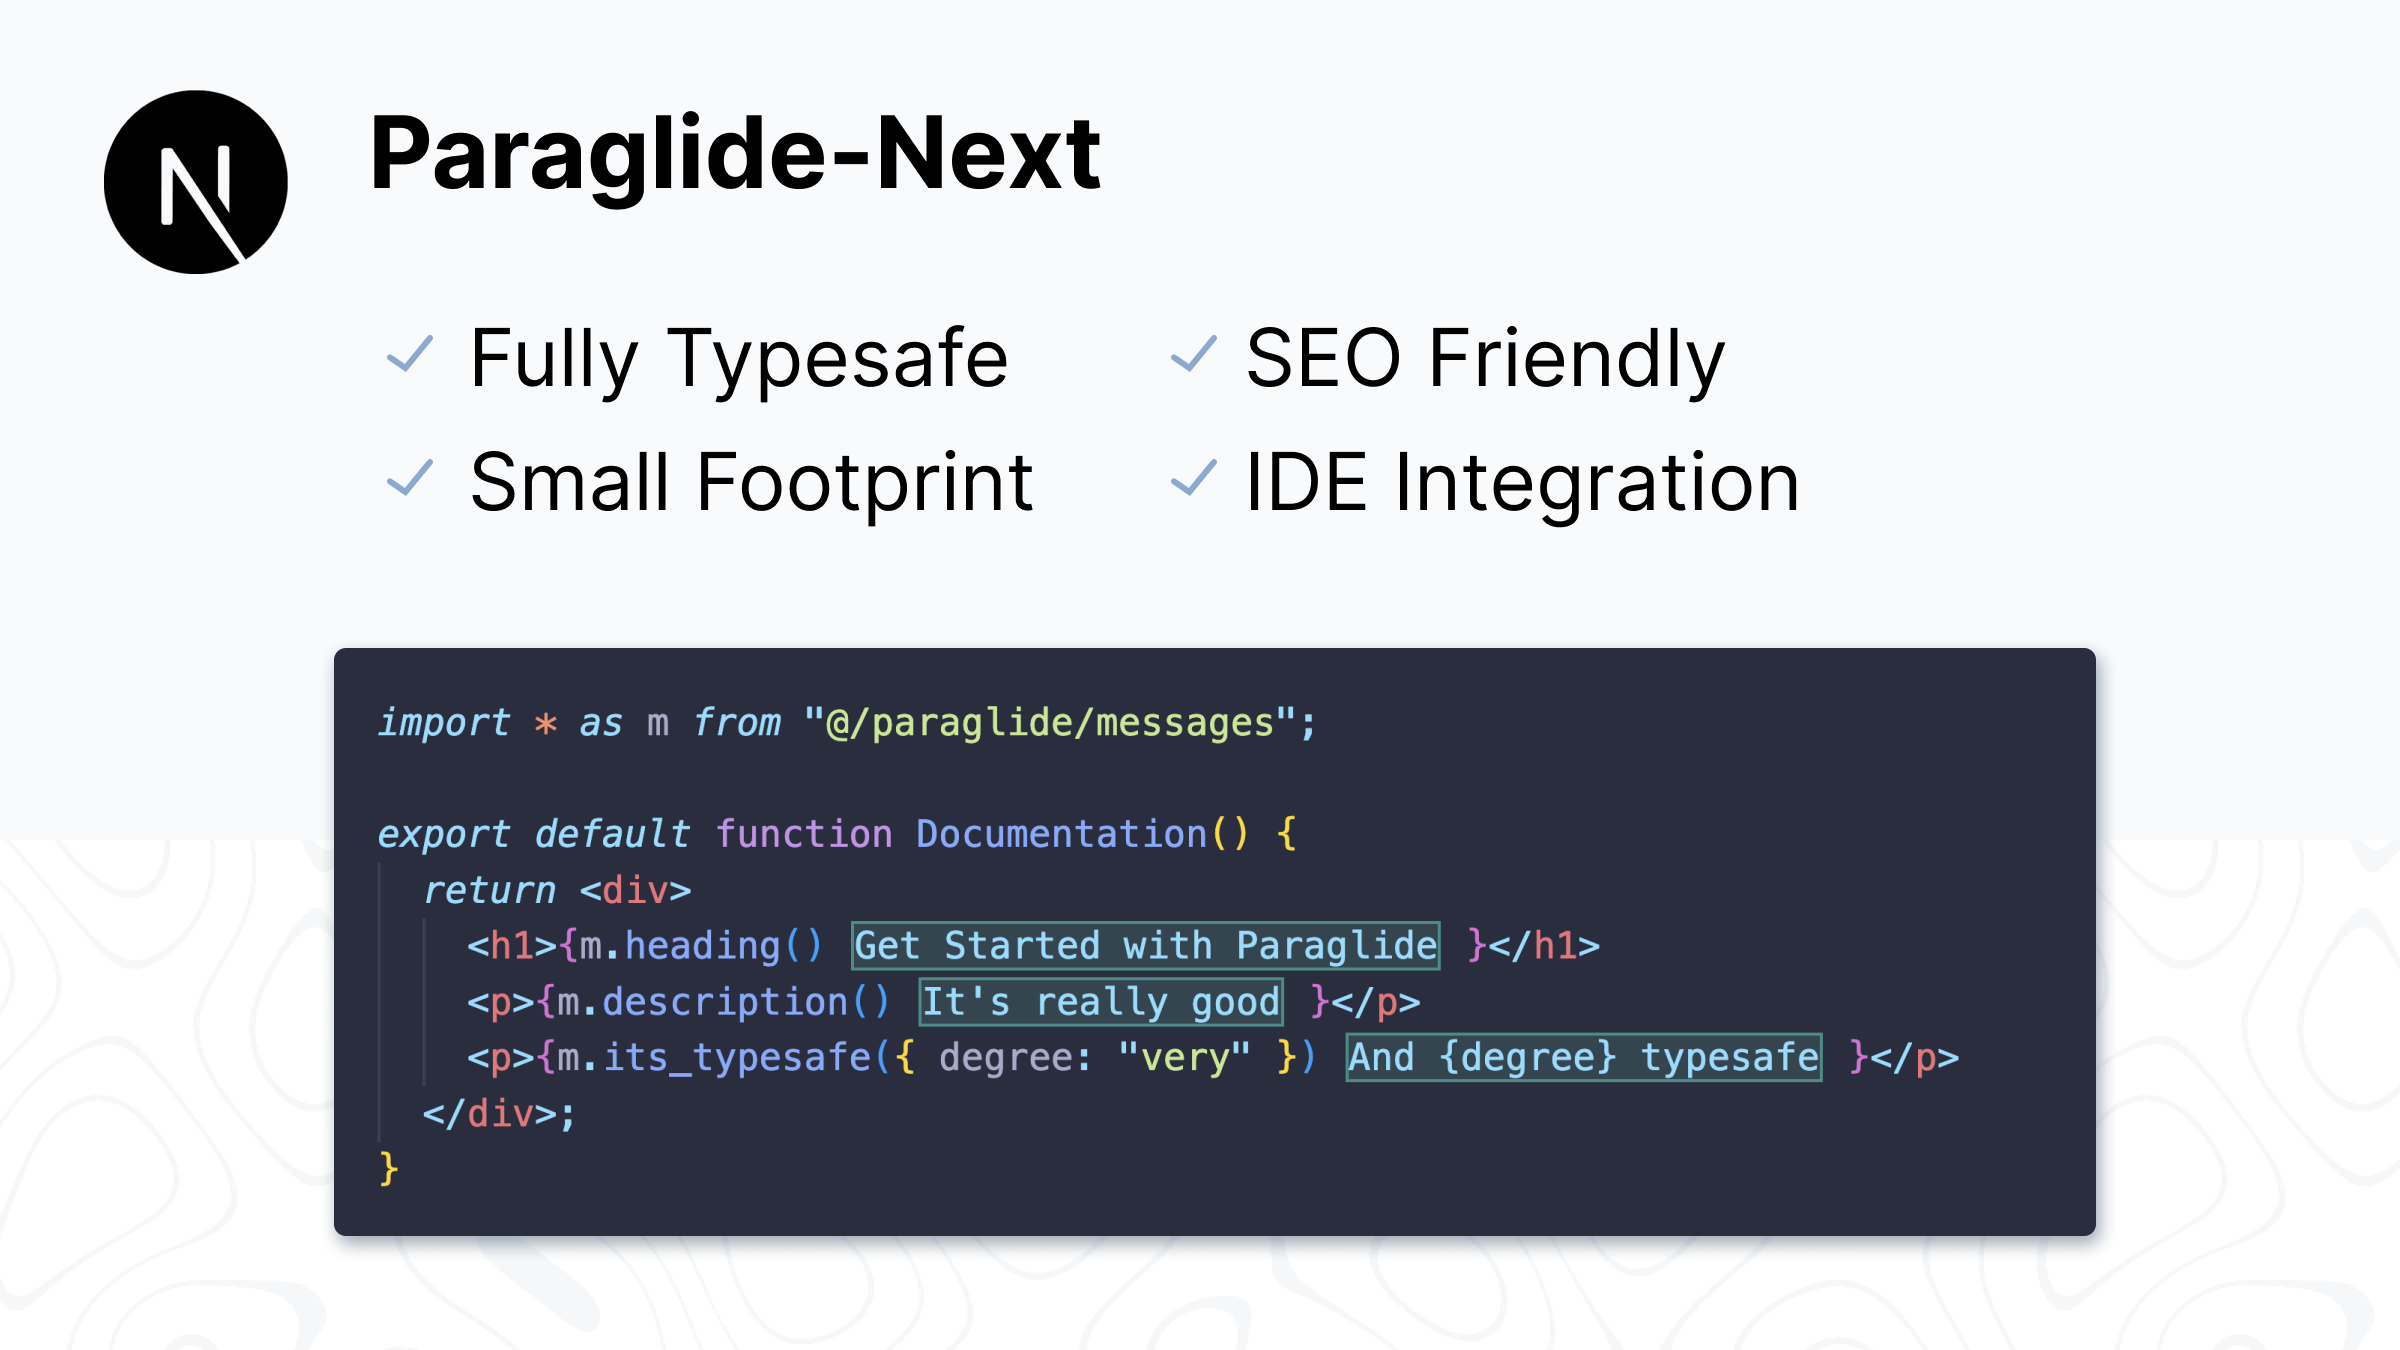 Dead Simple i18n. Typesafe, Small Footprint, SEO-Friendly and IDE Integration.